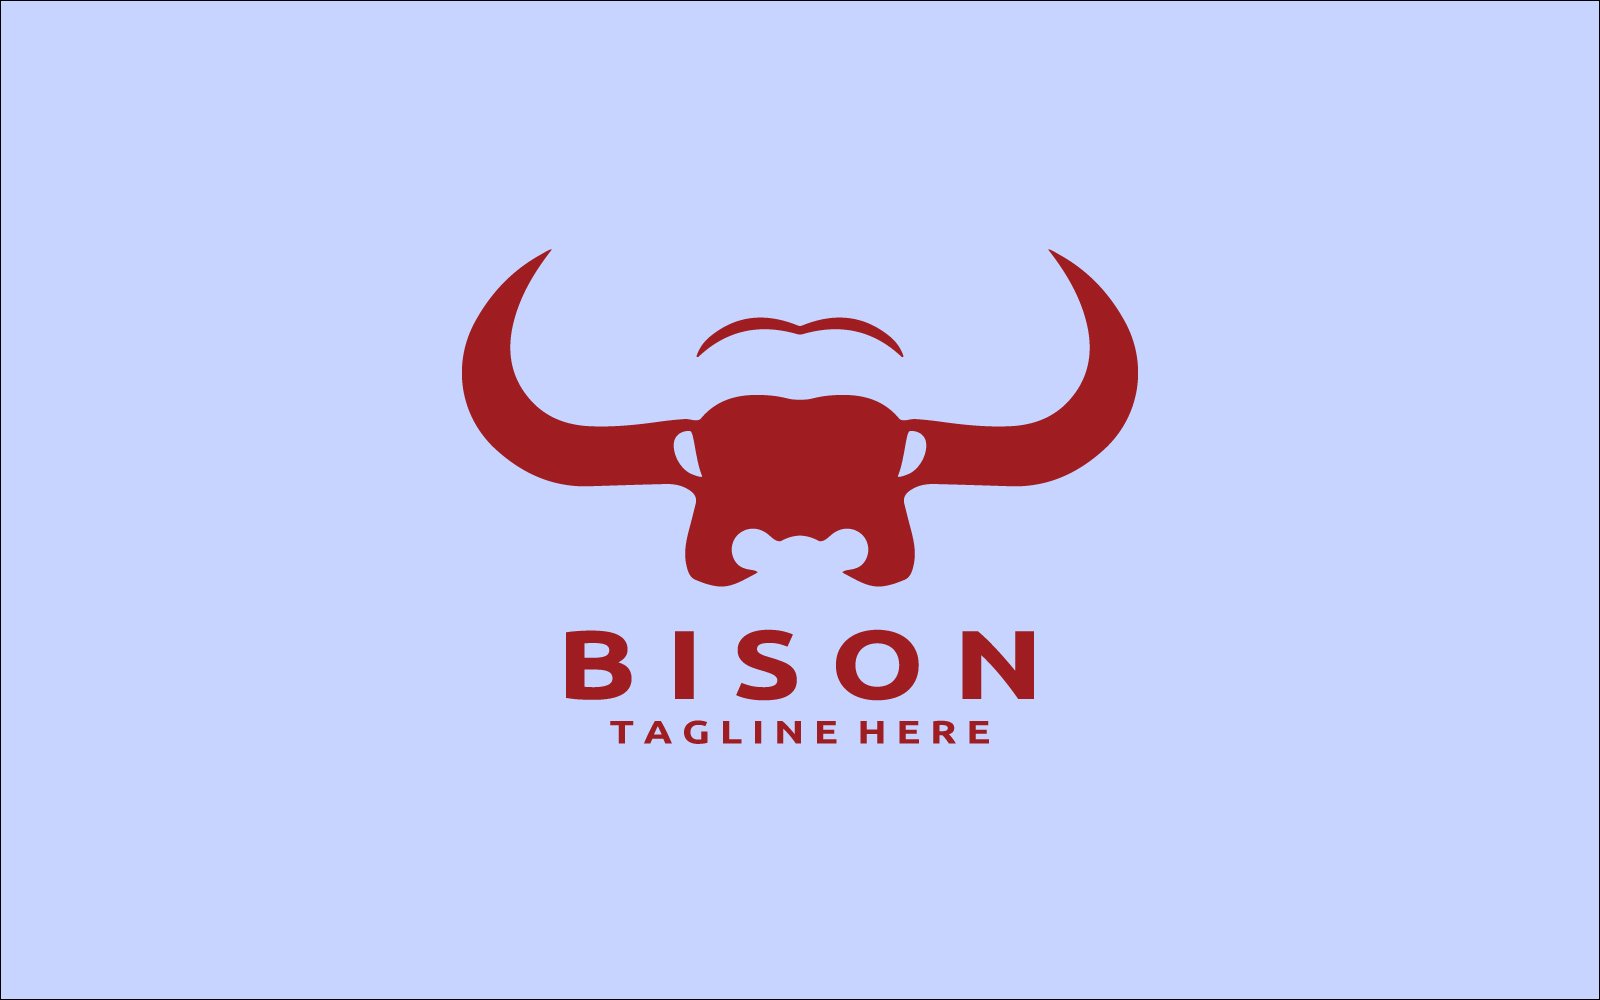 Template #381900 Logo Bison Webdesign Template - Logo template Preview